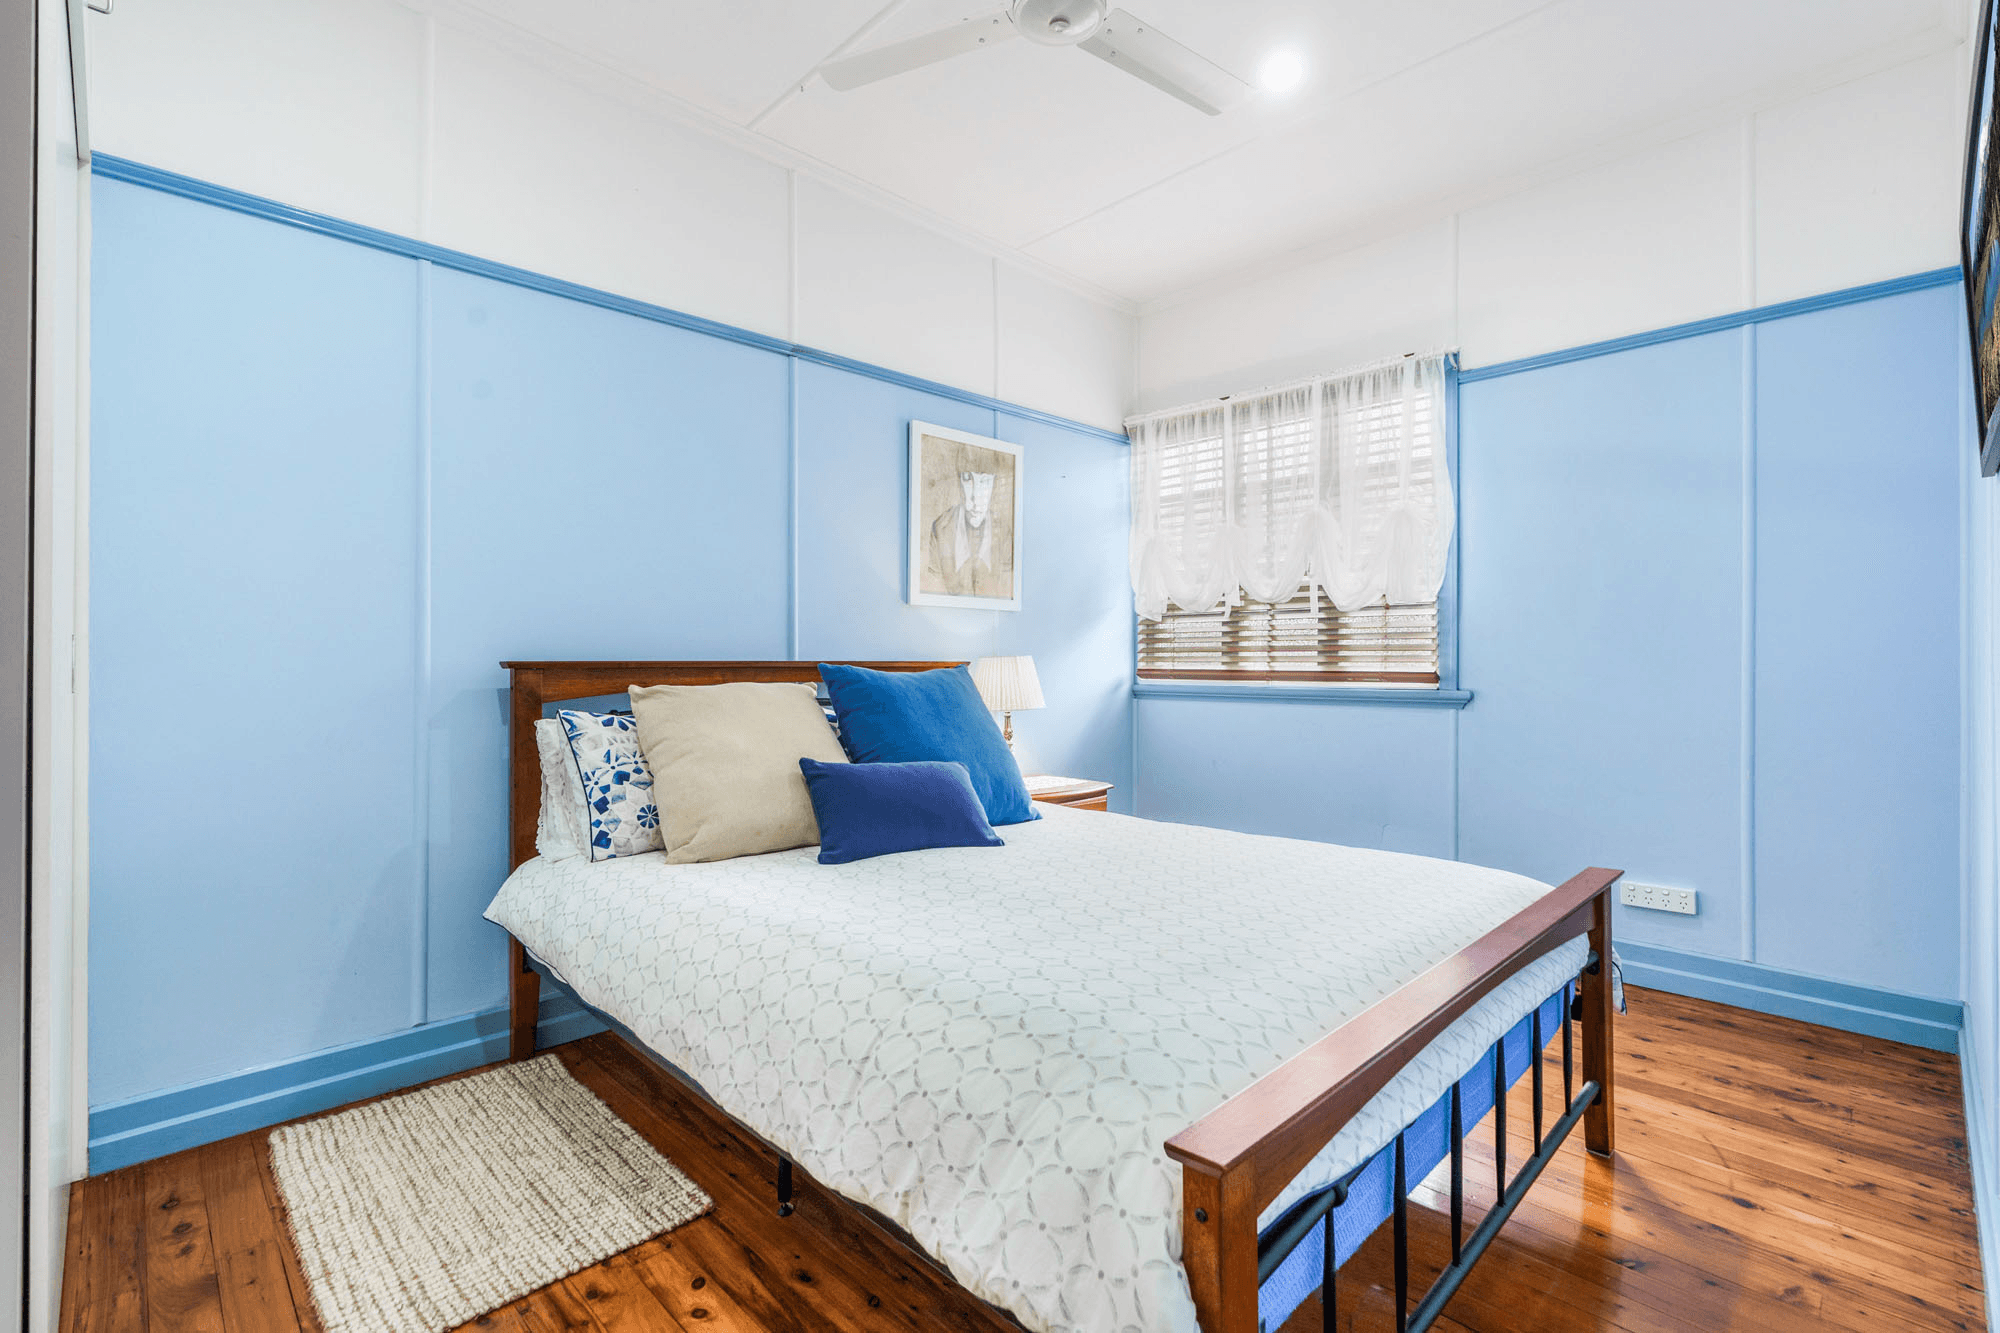 14 Strawberry Road, Manly West, QLD 4179